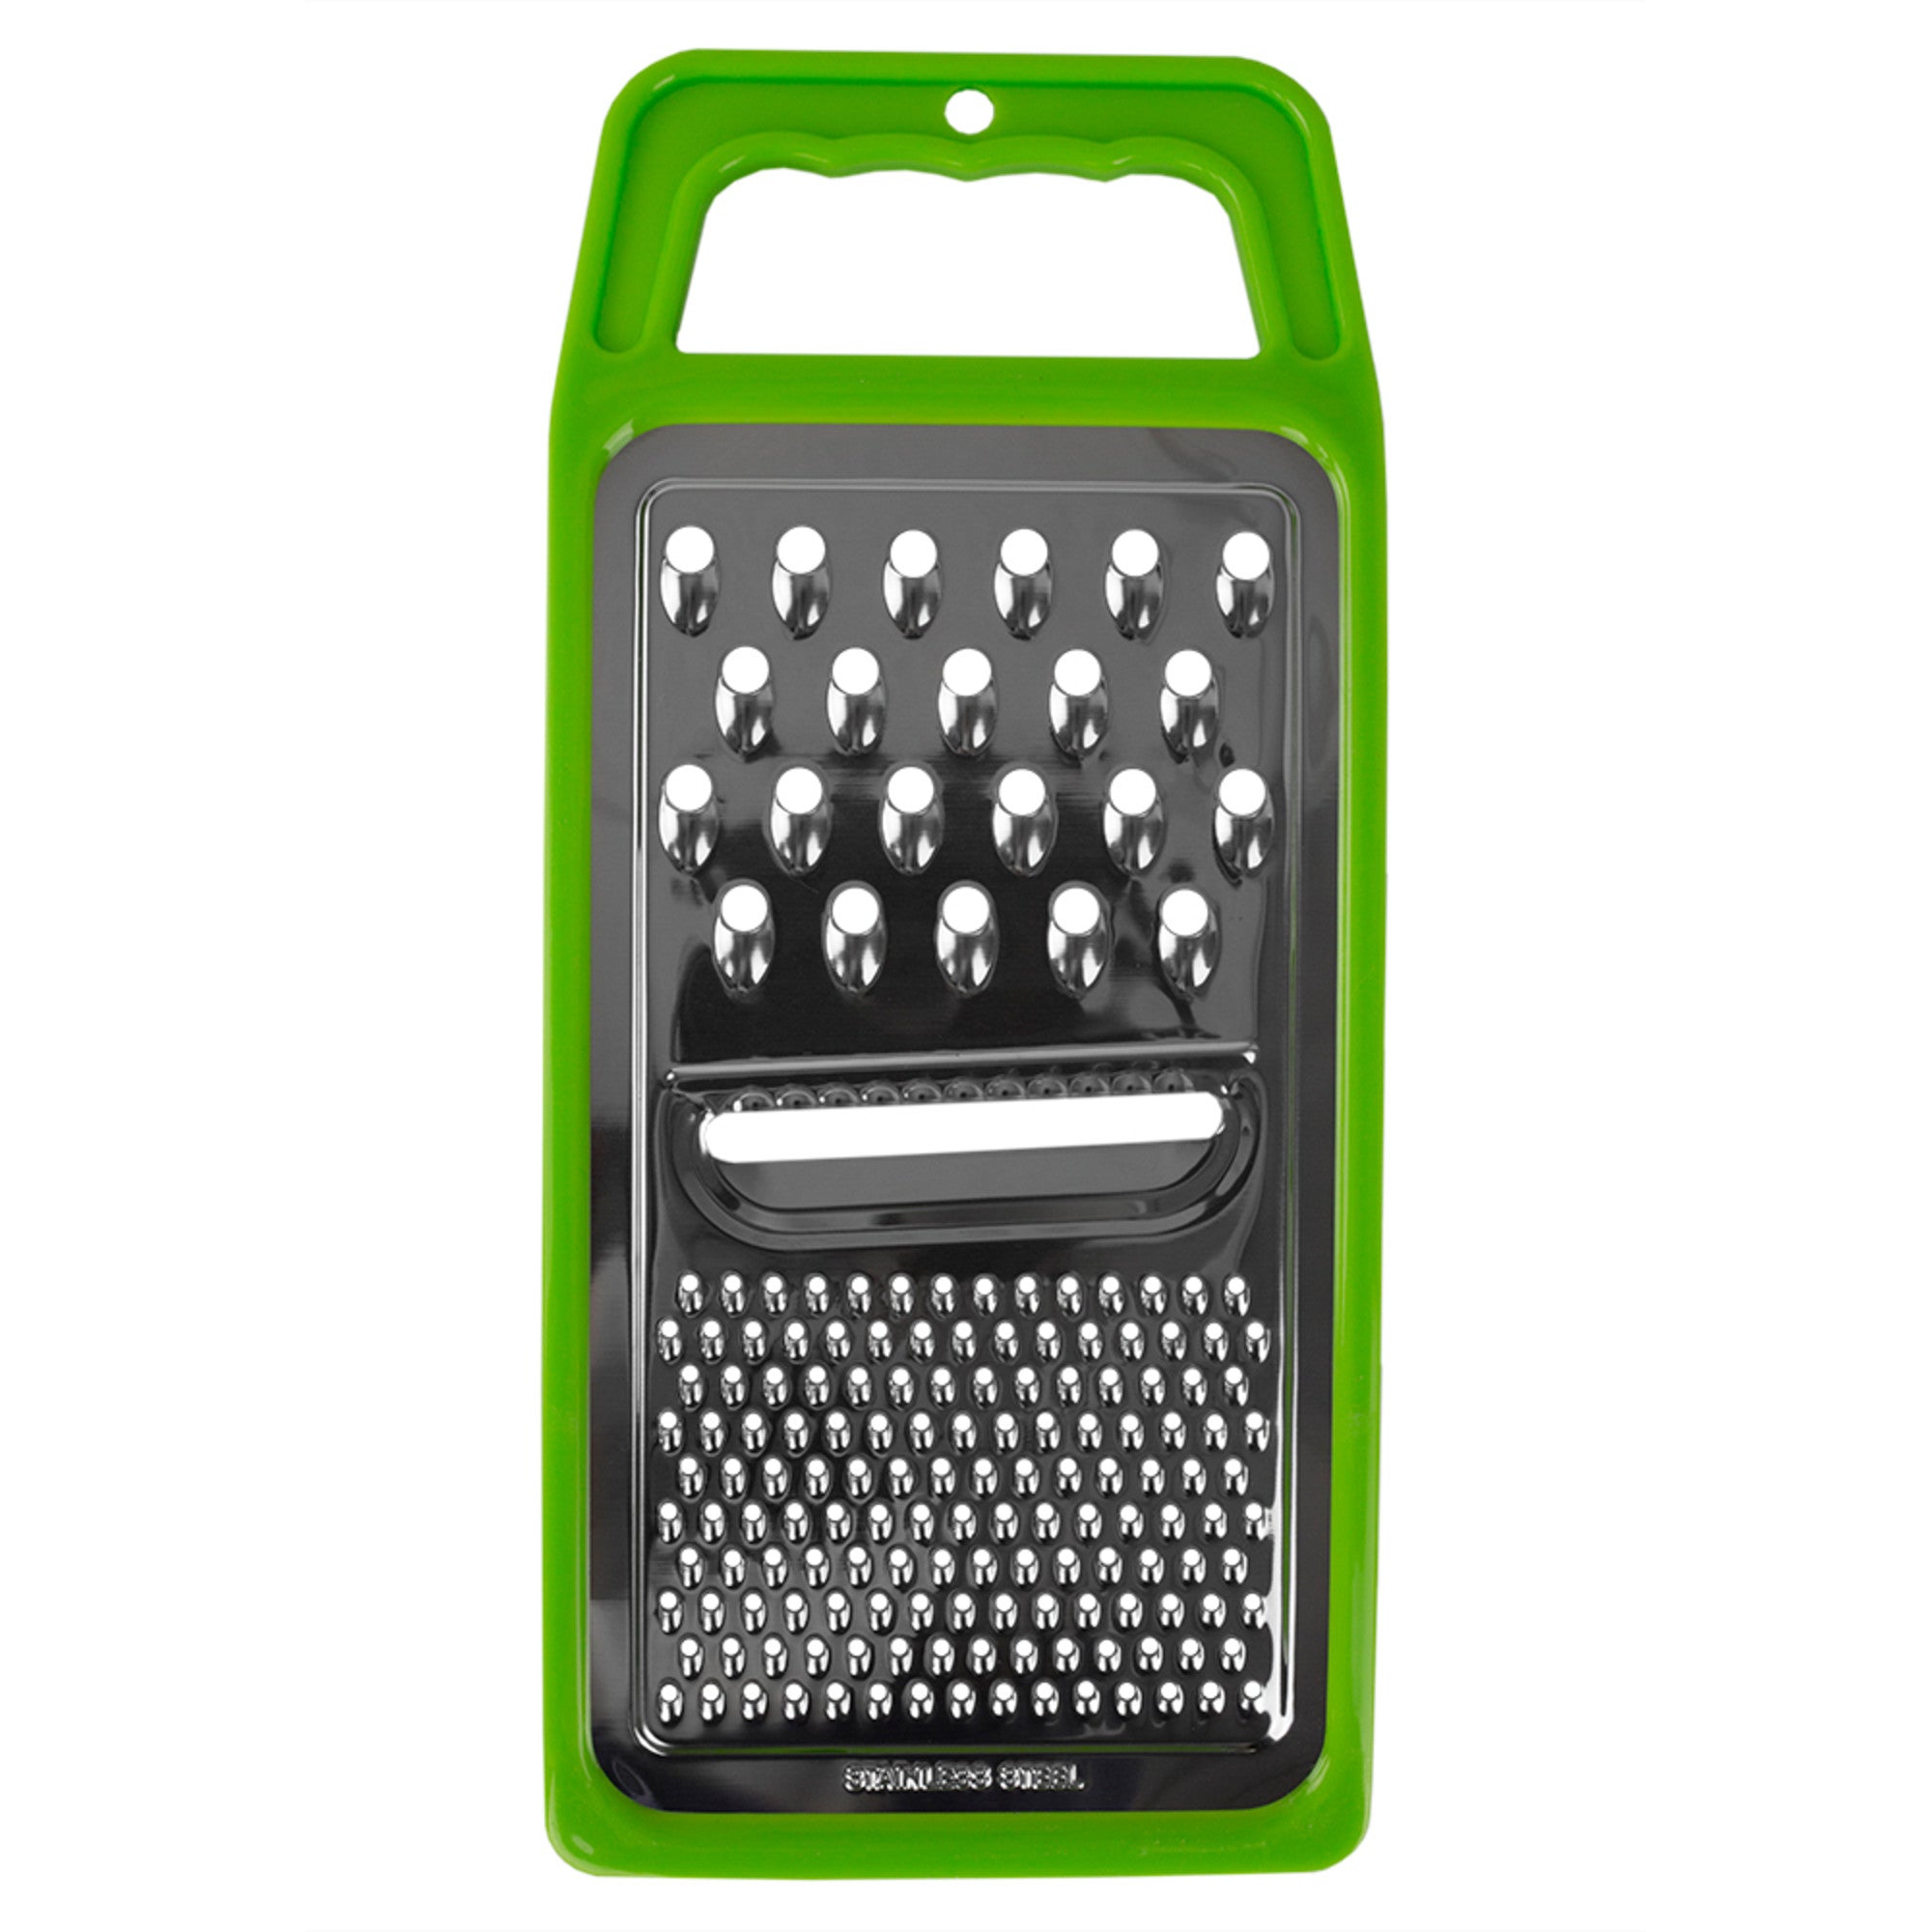 Home Basics Rotary Cheese Grater & Reviews